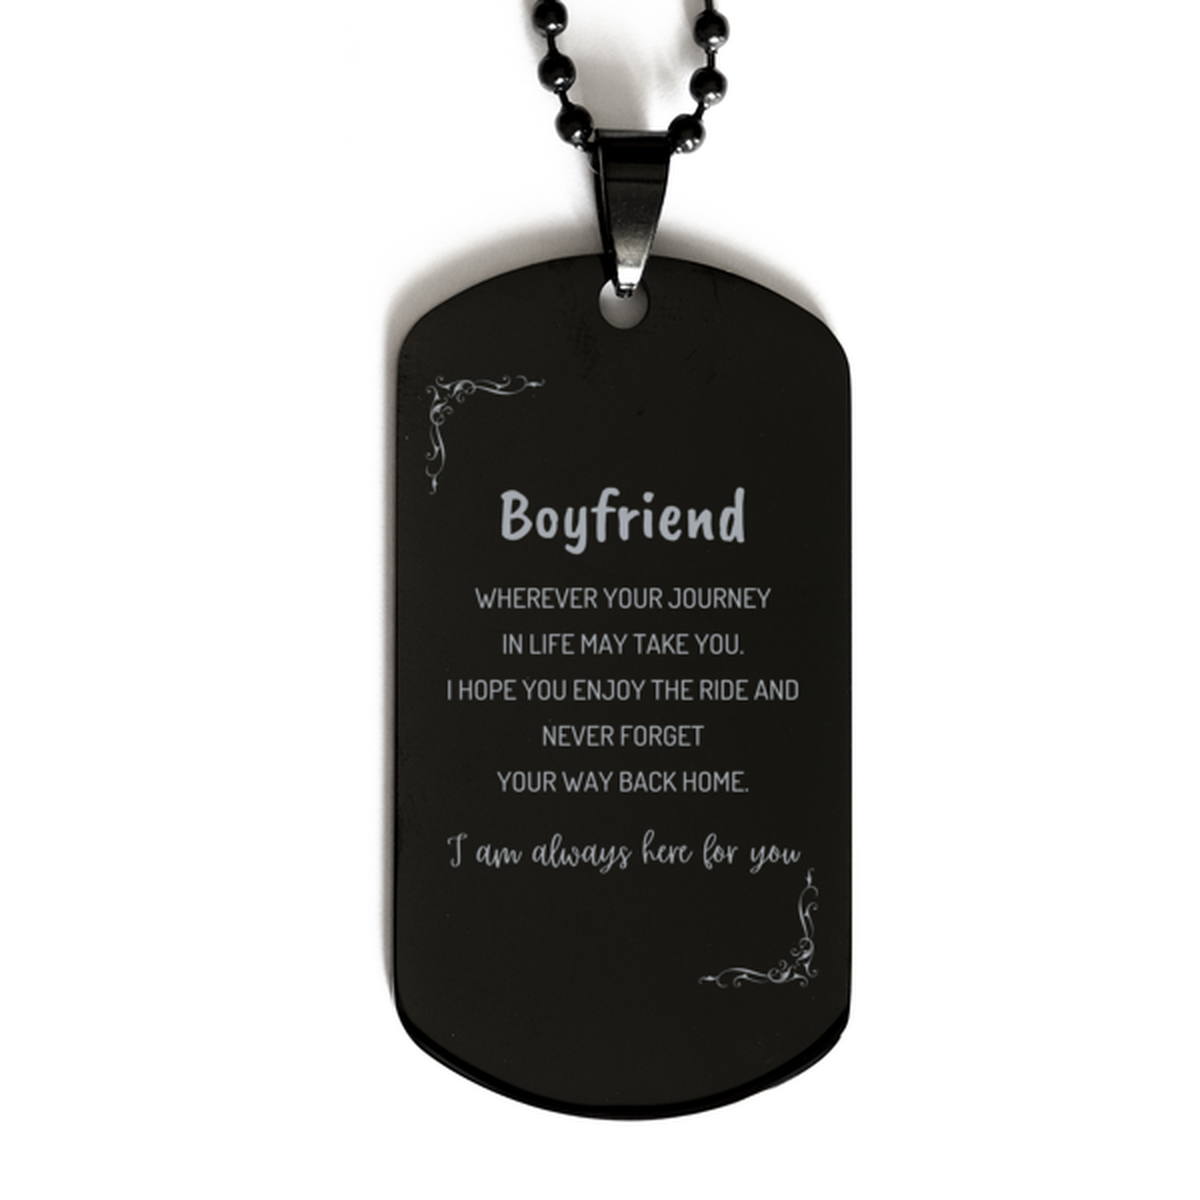 Boyfriend wherever your journey in life may take you, I am always here for you Boyfriend Black Dog Tag, Awesome Christmas Gifts For Boyfriend, Boyfriend Birthday Gifts for Men Women Family Loved One